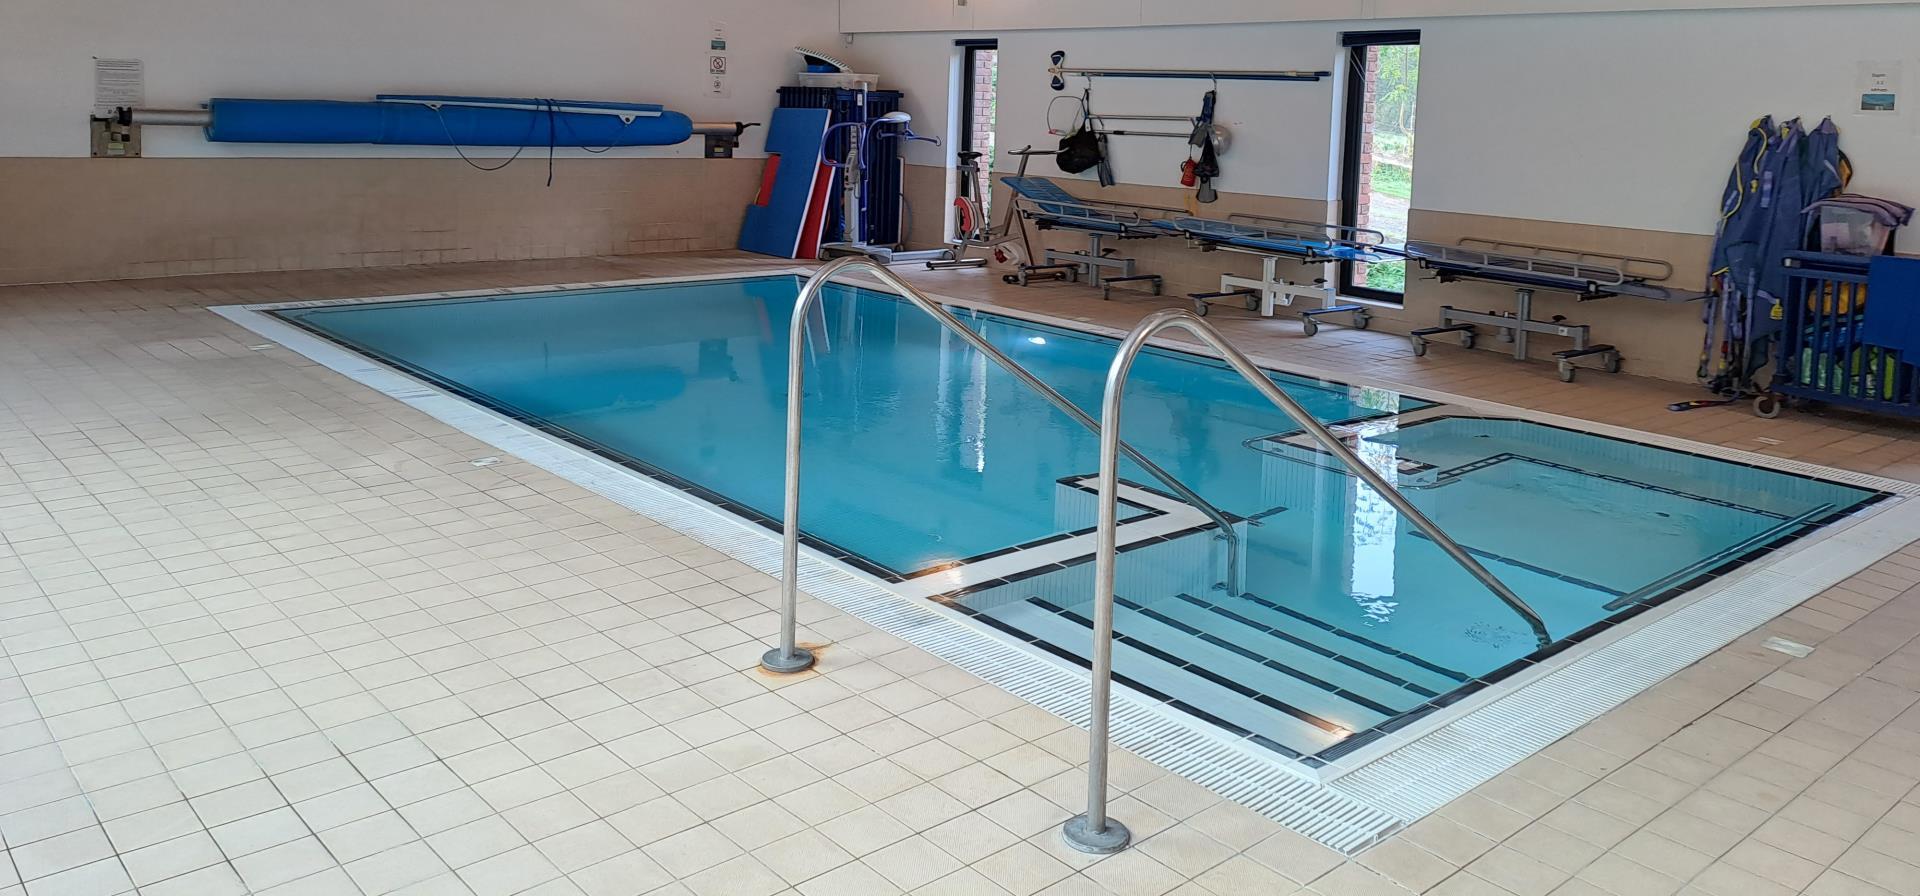 An indoor pool with a metal railing